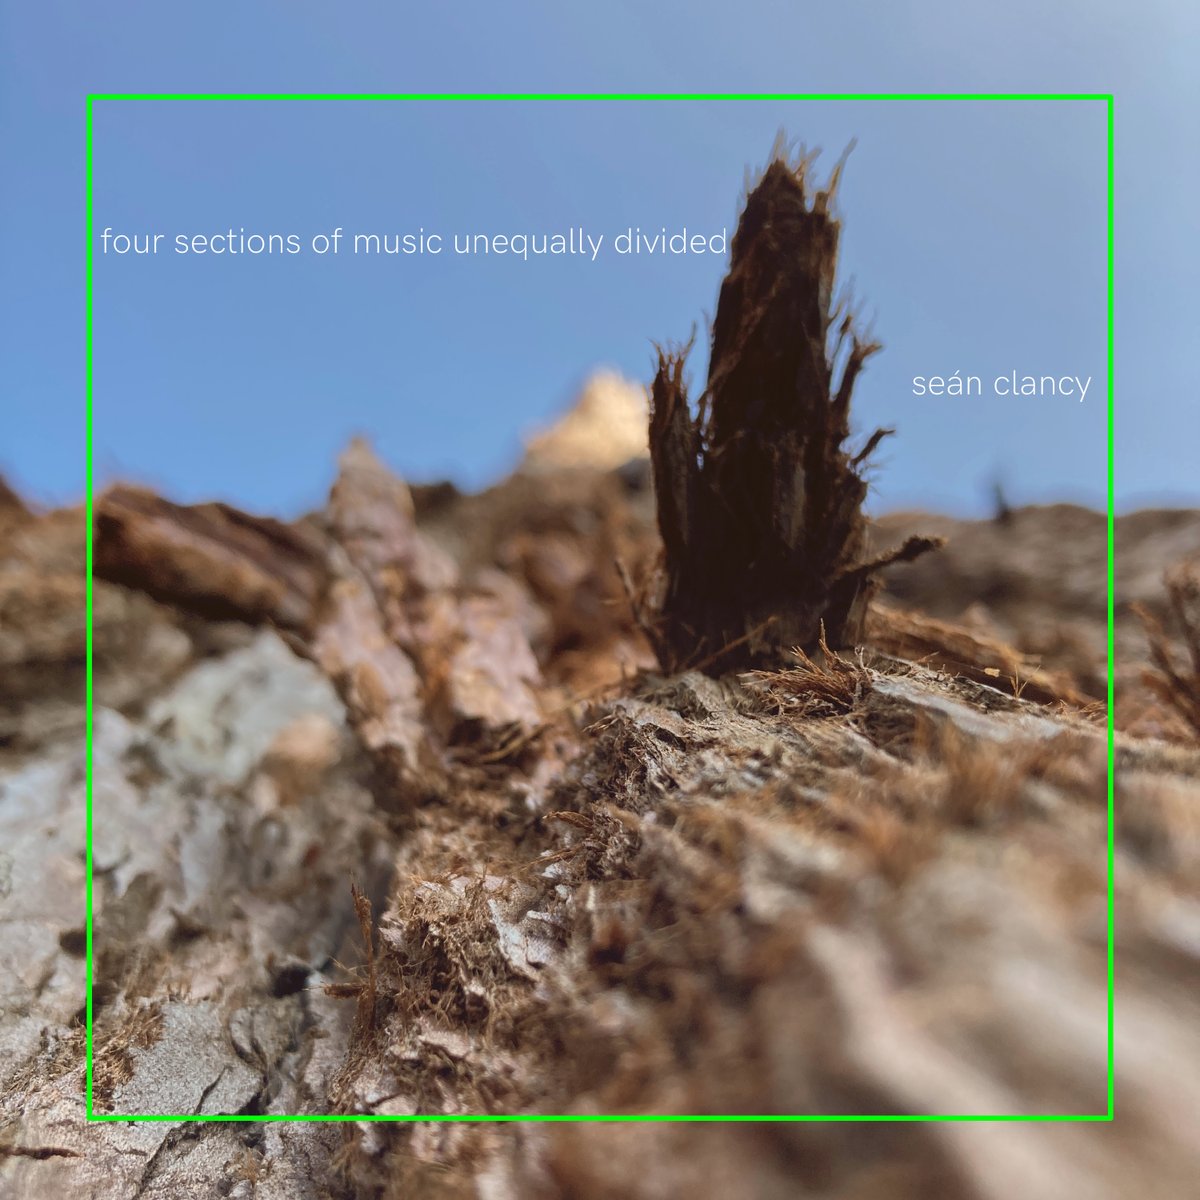 Seán Clancy, composer of music described as 'equal part sacred, seductive and superficial' (TEMPO), releases his new album 'four sections of music unequally divided' on FRIDAY 29 MARCH /// pre-order here seanclancy.bandcamp.com/album/four-sec… /// more info here nmc-recordings.myshopify.com/products/sean-…